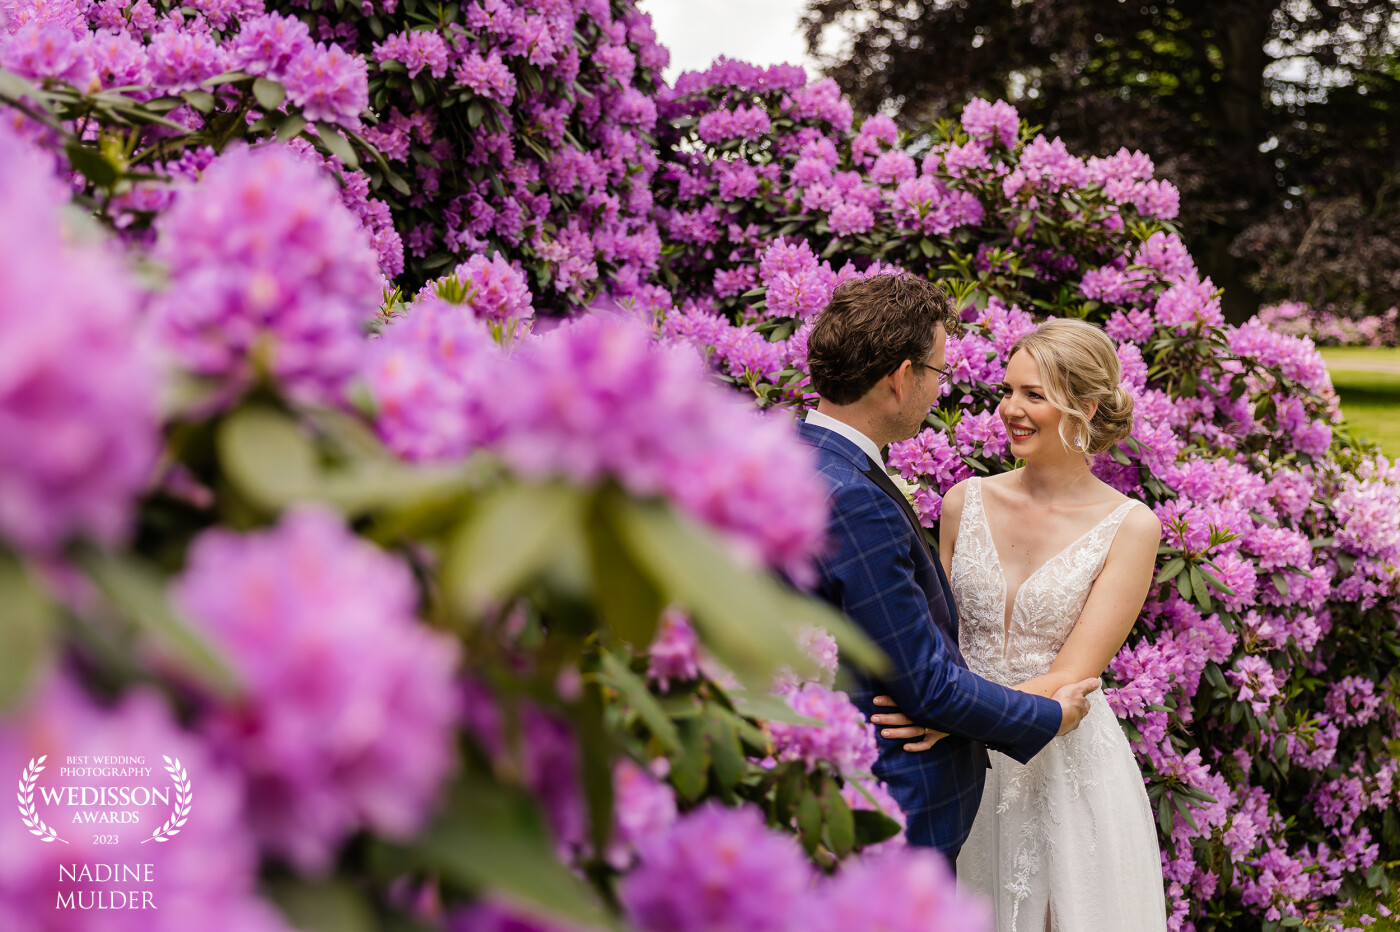 This wedding was one of the first of my wedding season in 2022. I’m obsessed with these perfect flowers and look at the colors! It just looks so romantic and what a wonderful couple!